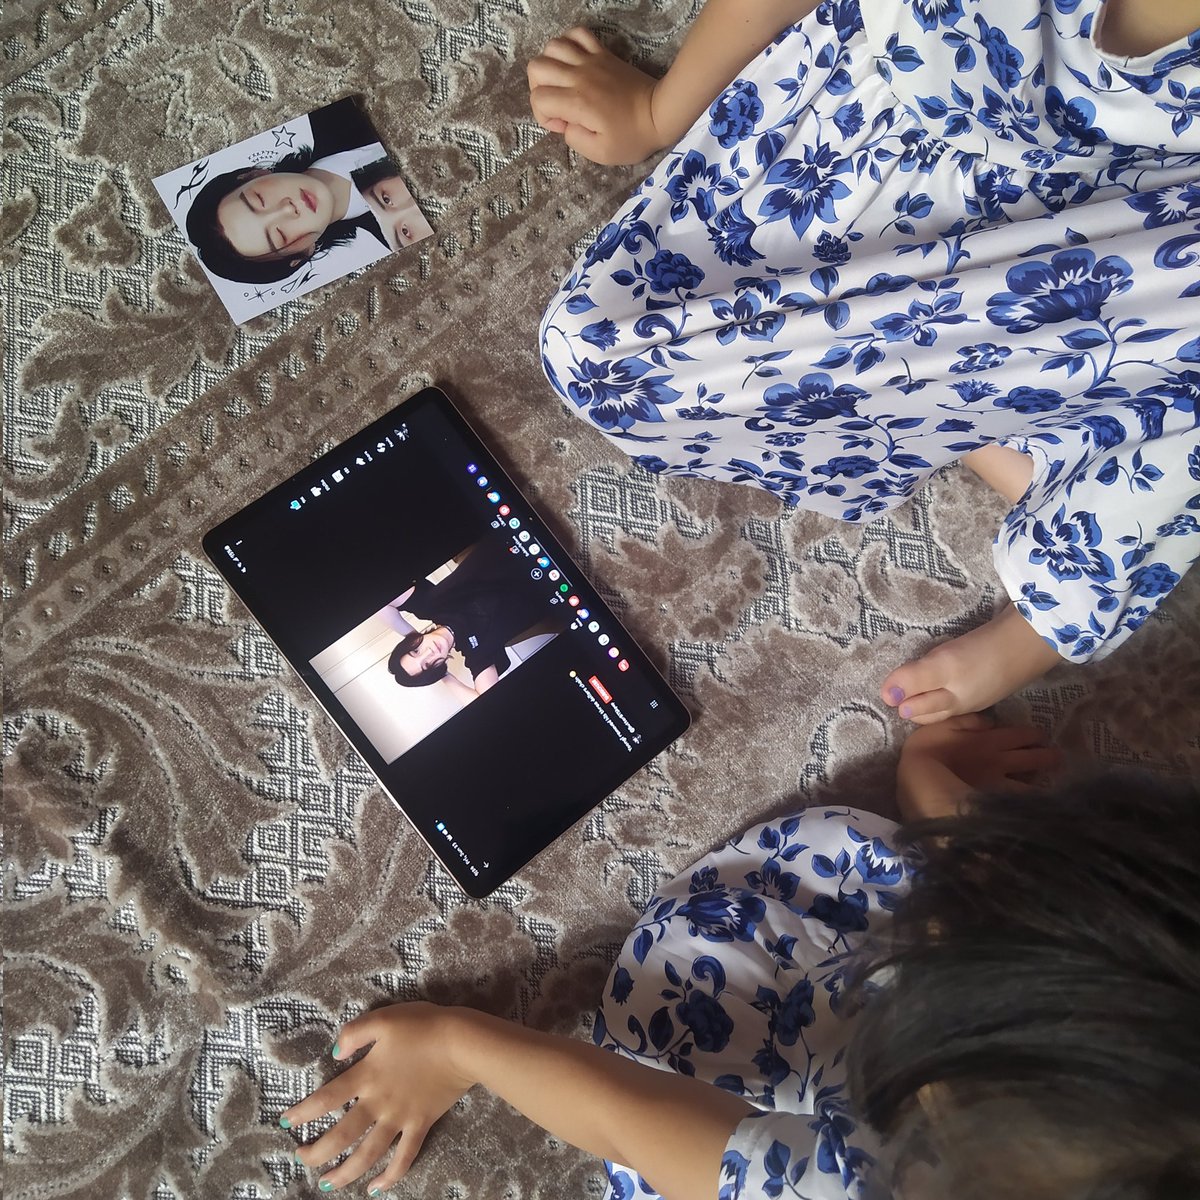 Me leaving my nieces for some time just to find them like this 😆 yoongi's impact is real whether you are old young or a kid